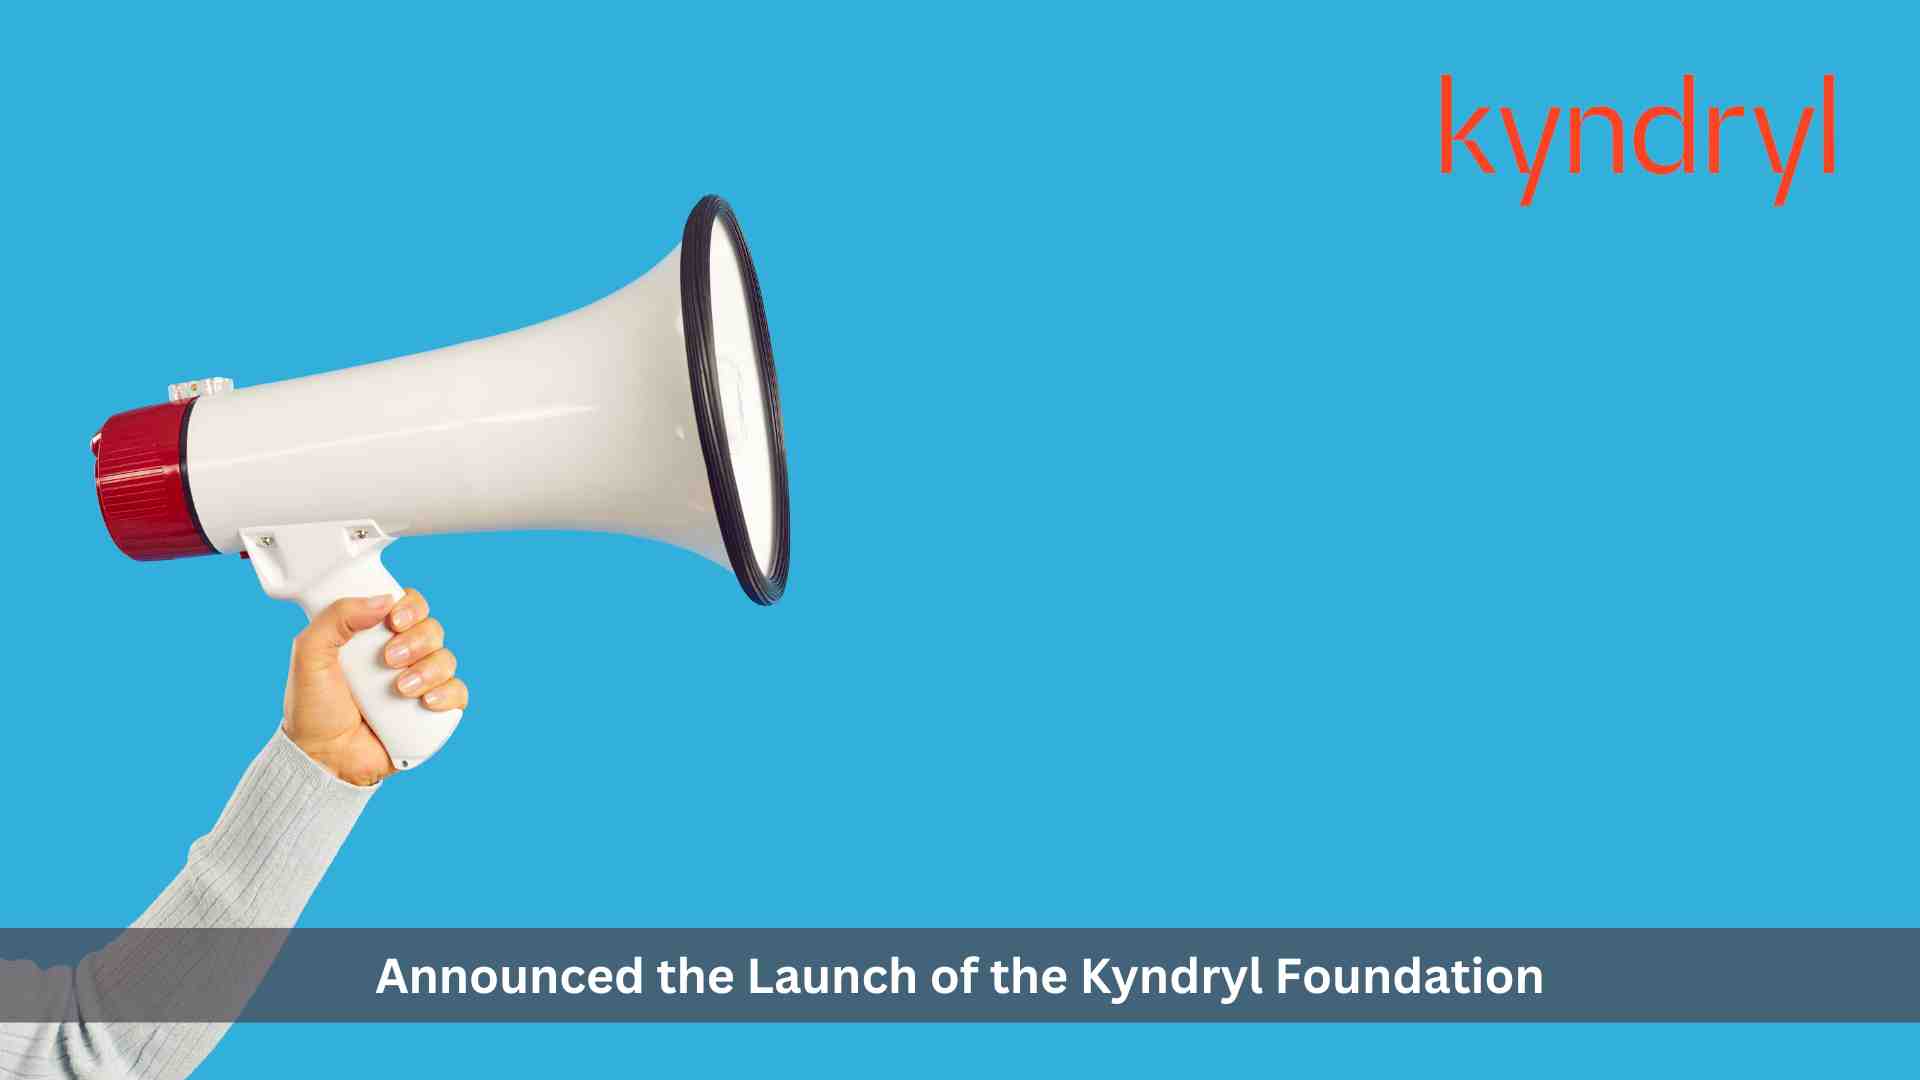 Kyndryl Foundation Launches to Power Progress in Local Communities